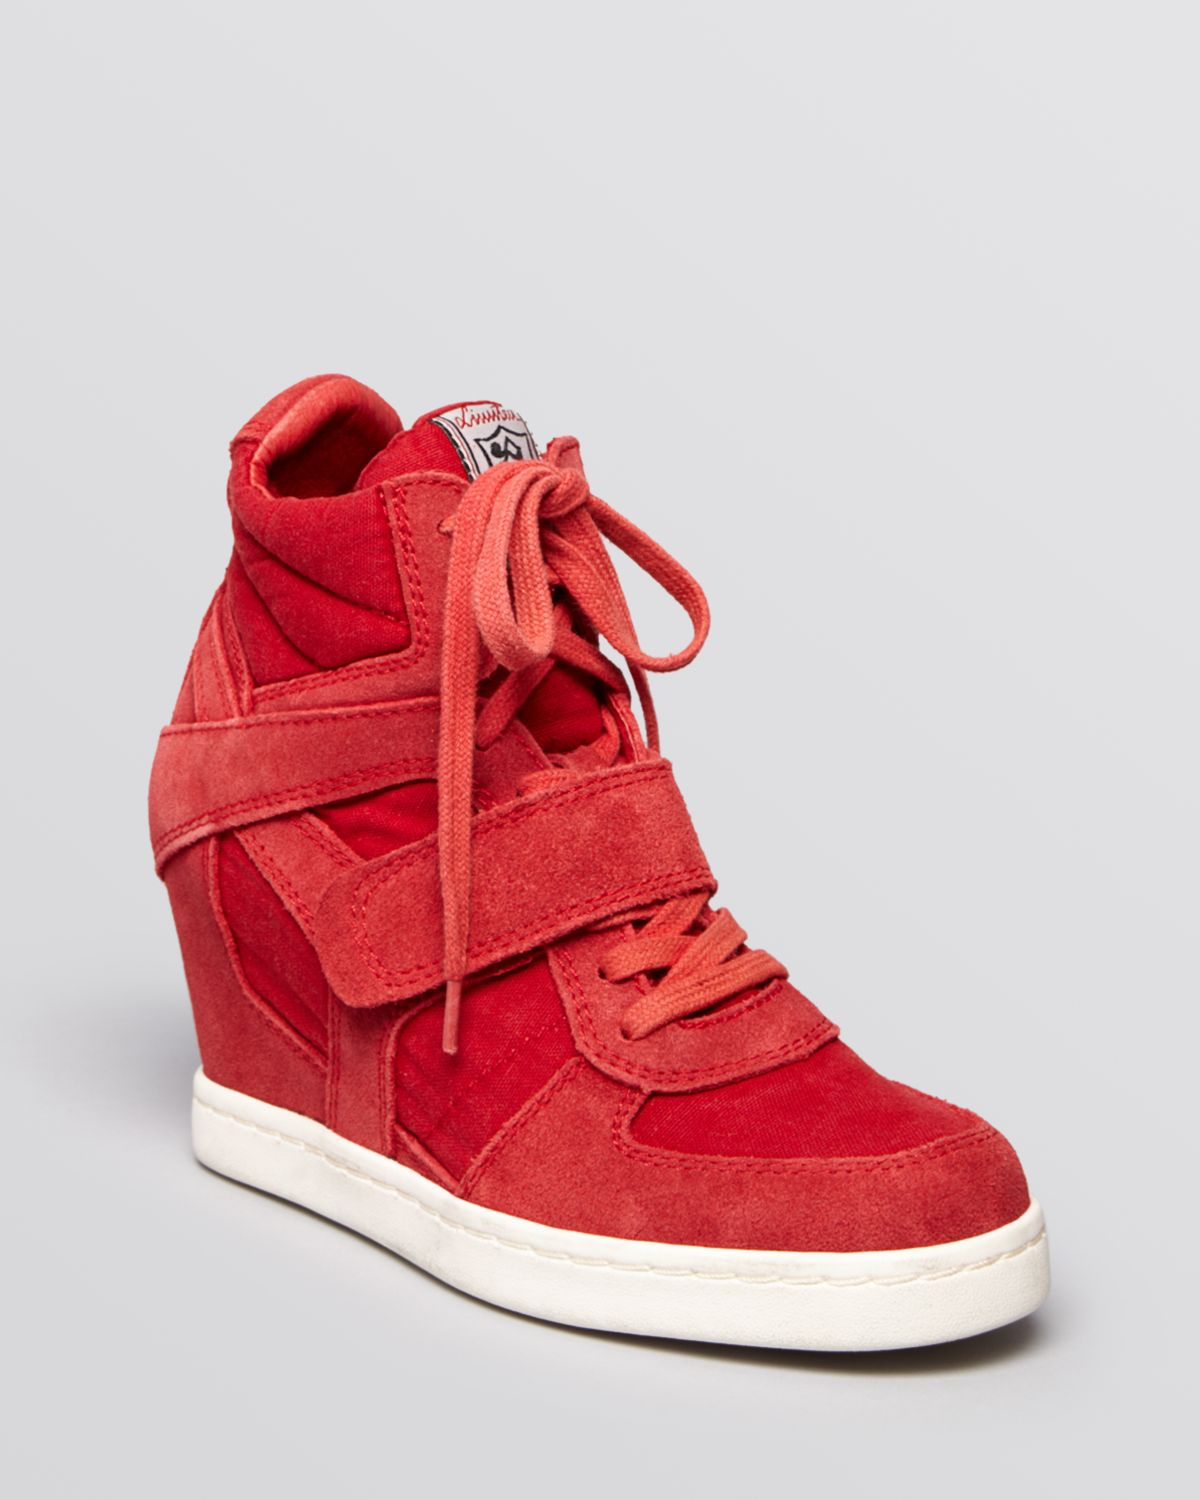 Ash Lace Up Wedge Sneakers Cool in Red - Lyst